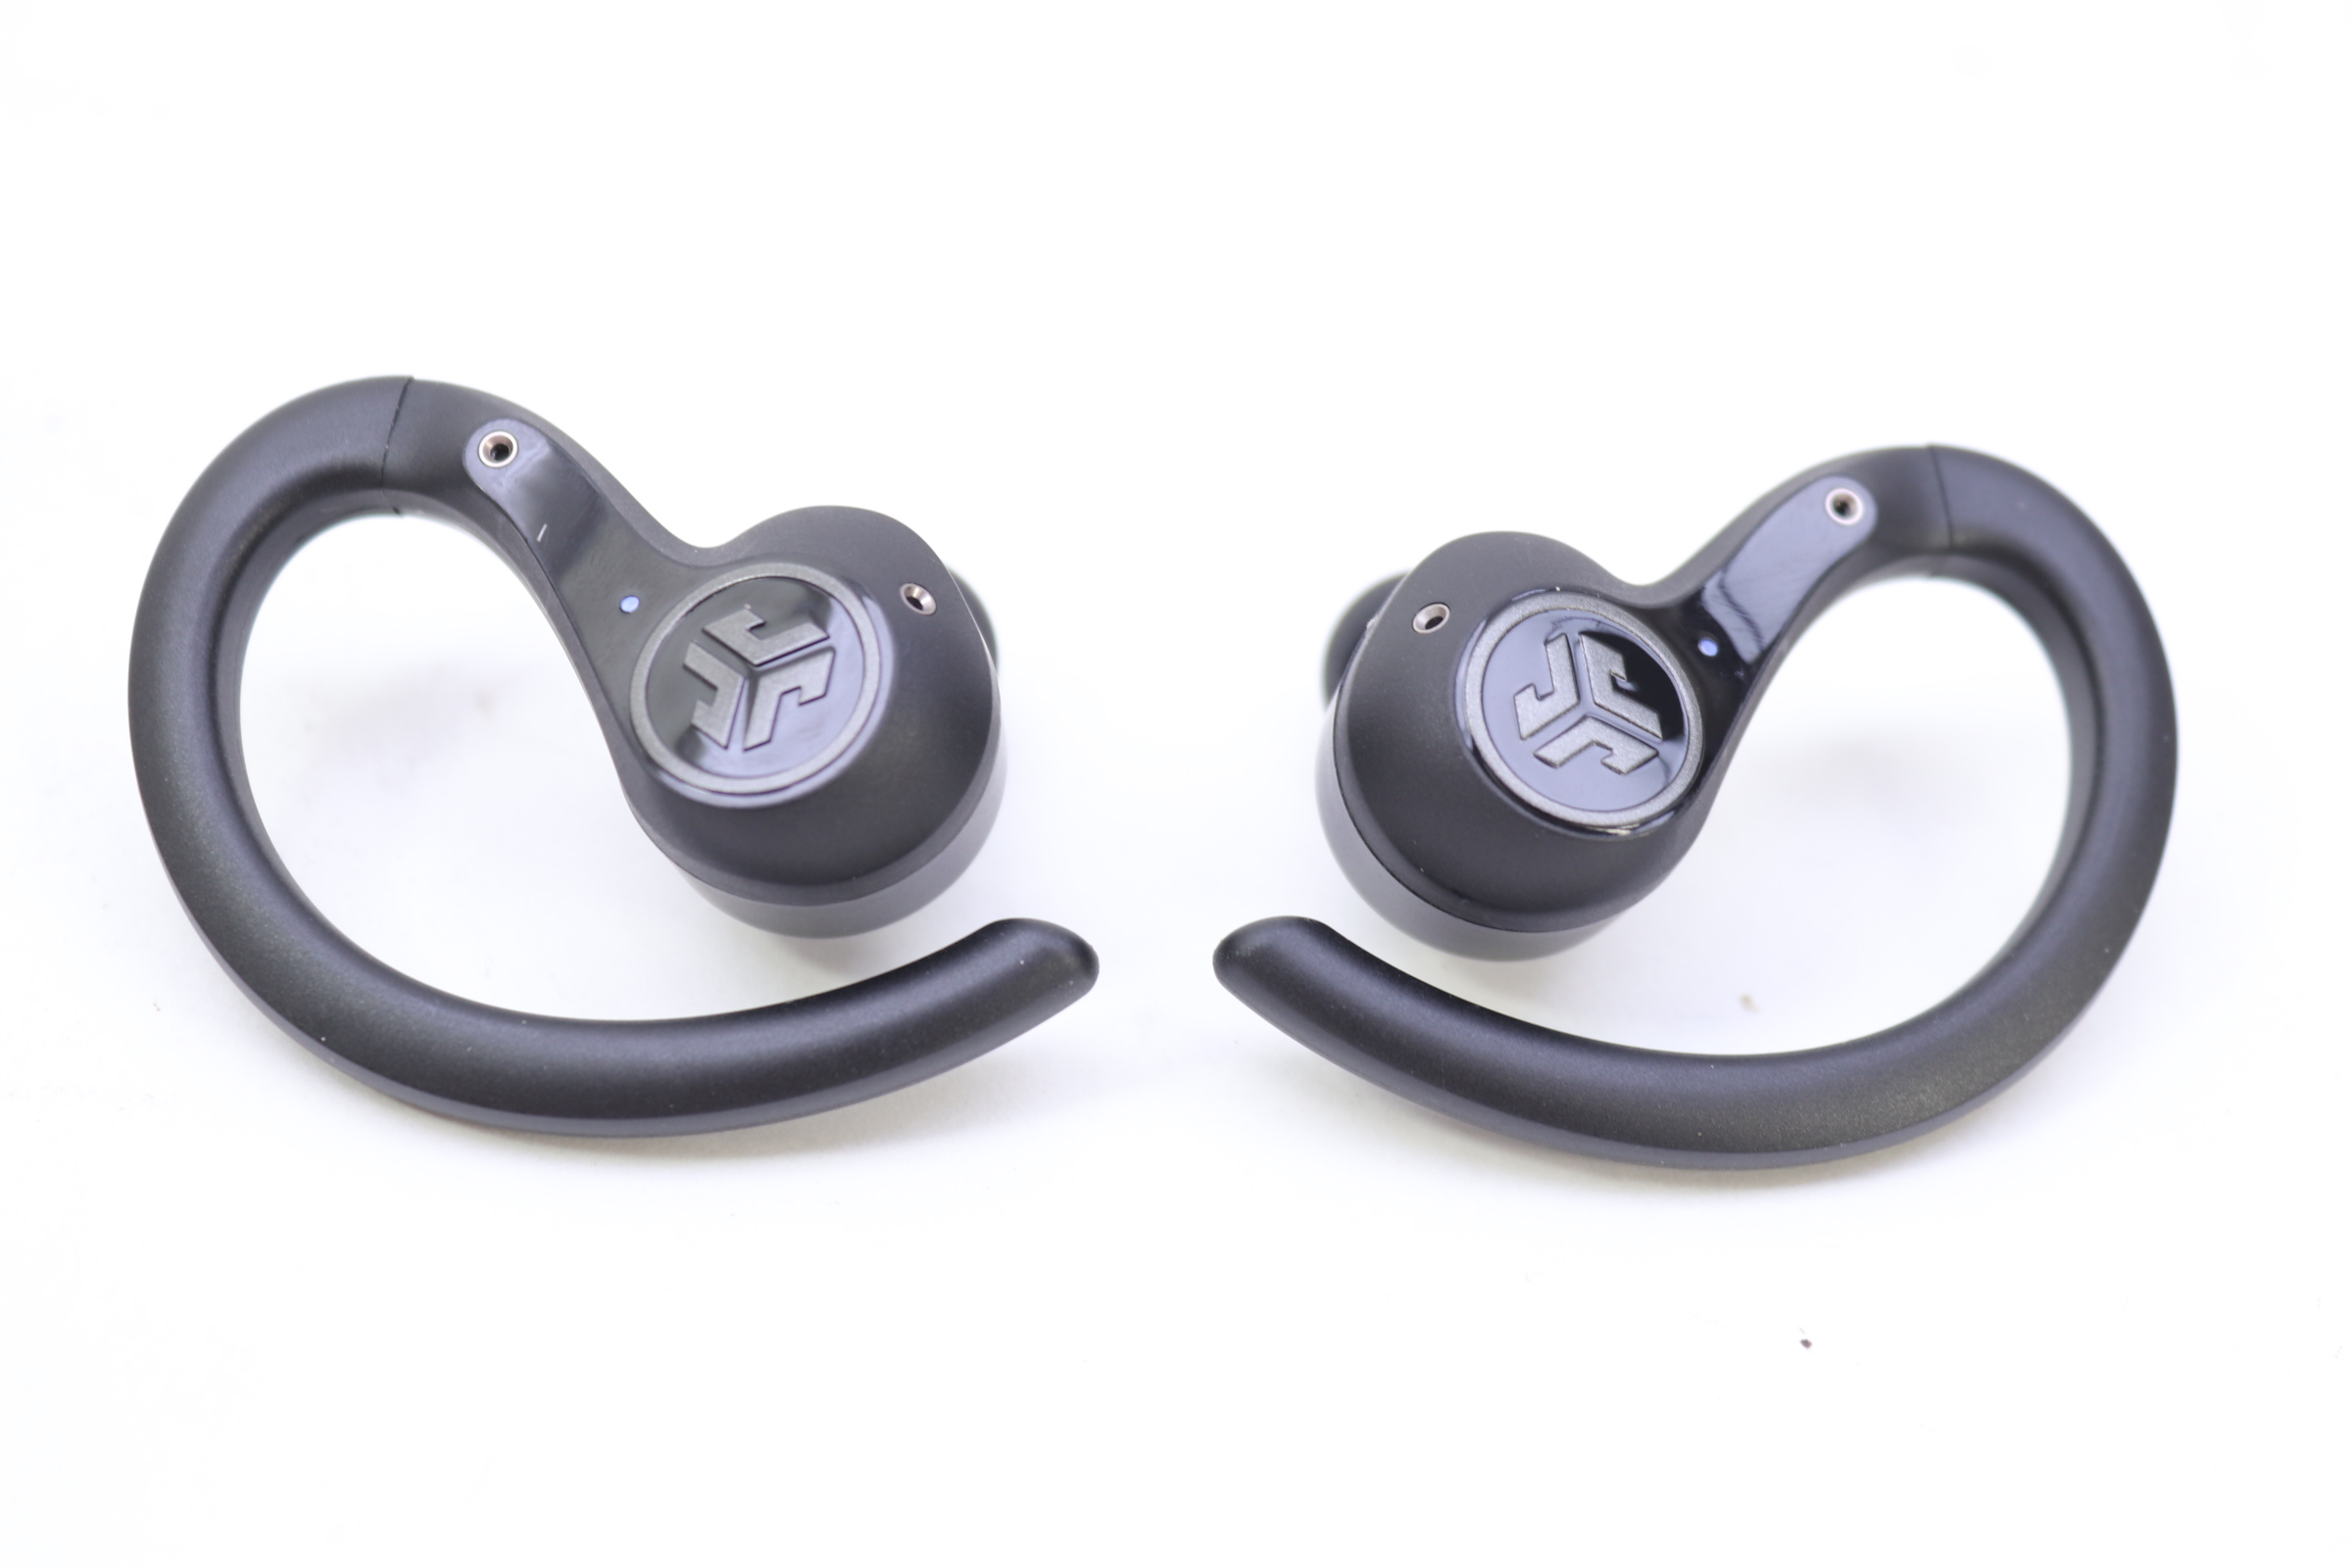 Jlab Epic Air Sport Active Noise Cancelling True Wireless Bluetooth Earbuds  : Target